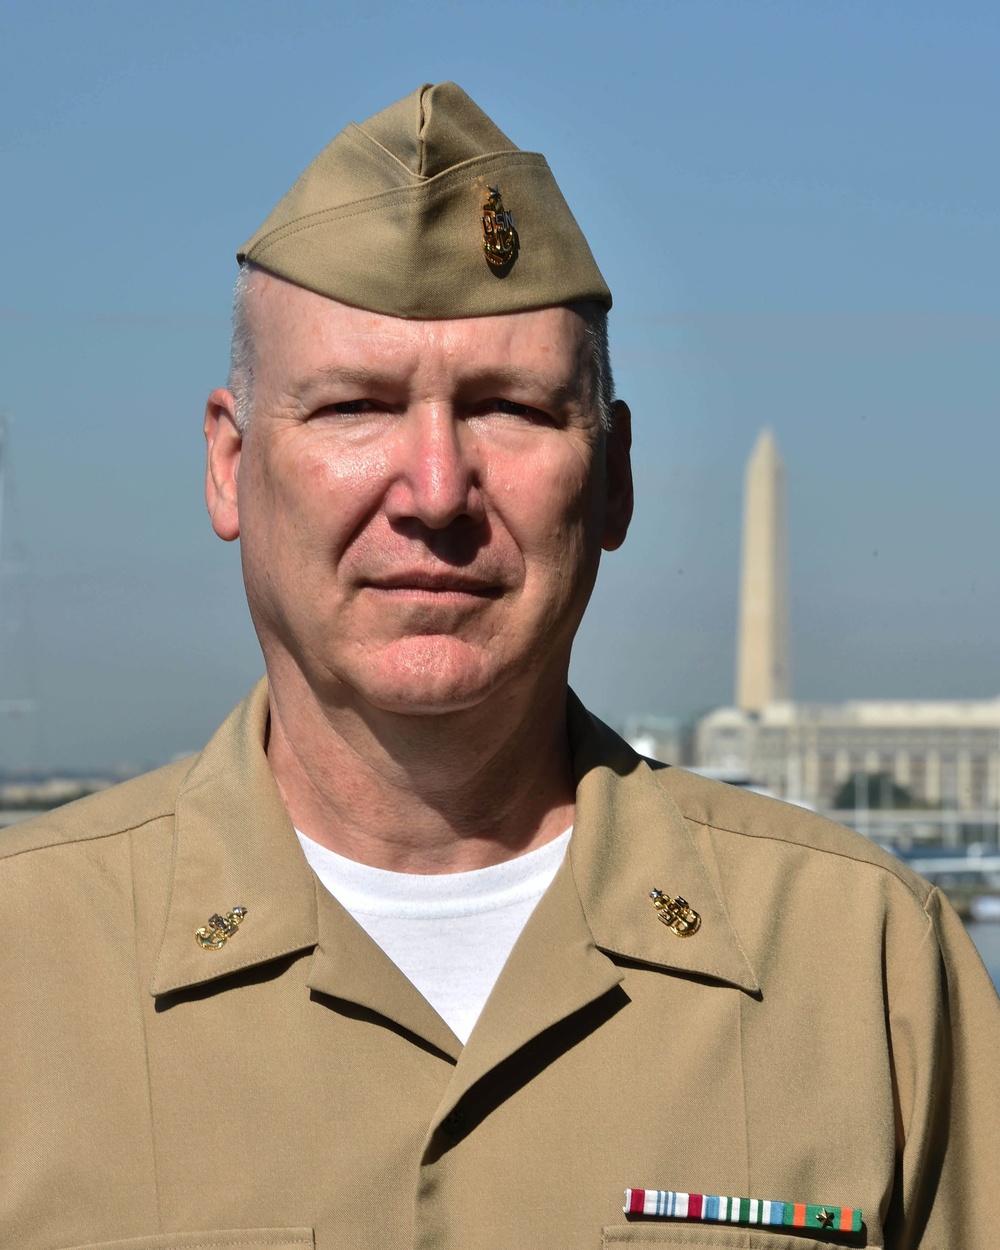 Navy Senior Chief Petty Officer Bartsch supports presidential inauguration